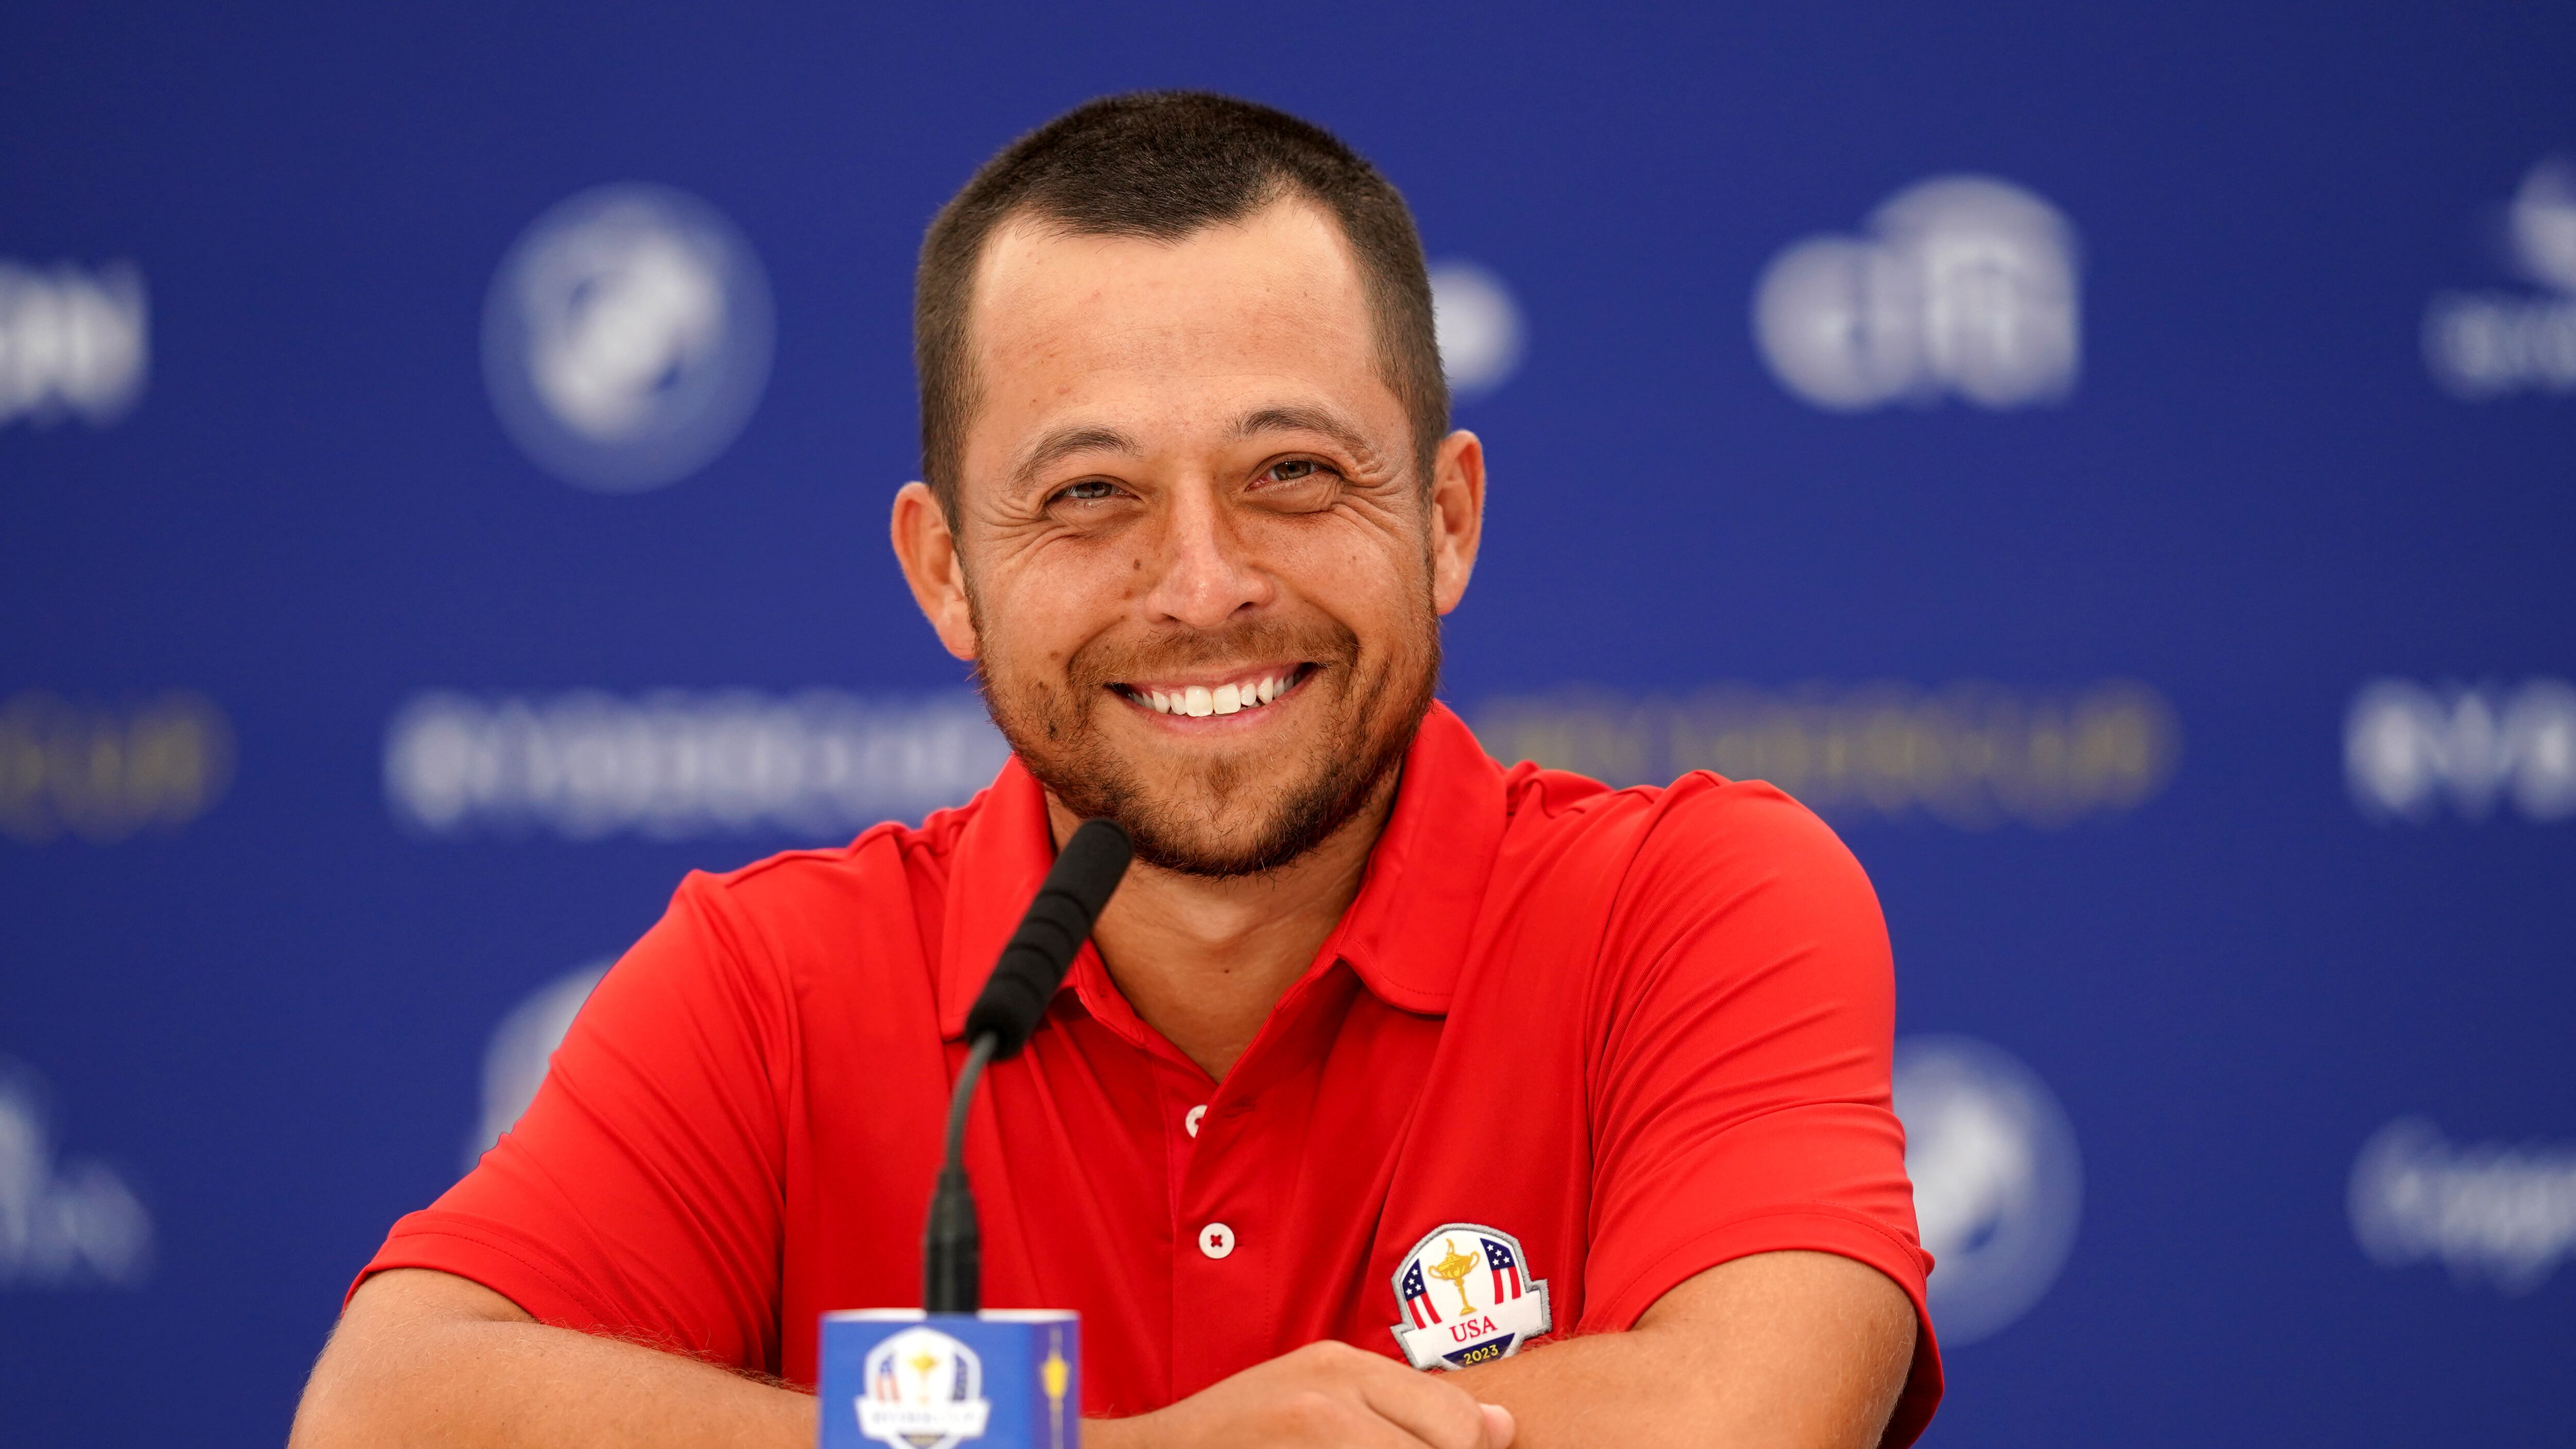 Xander Schauffele held a one-shot lead heading into the third round of the US PGA Championship